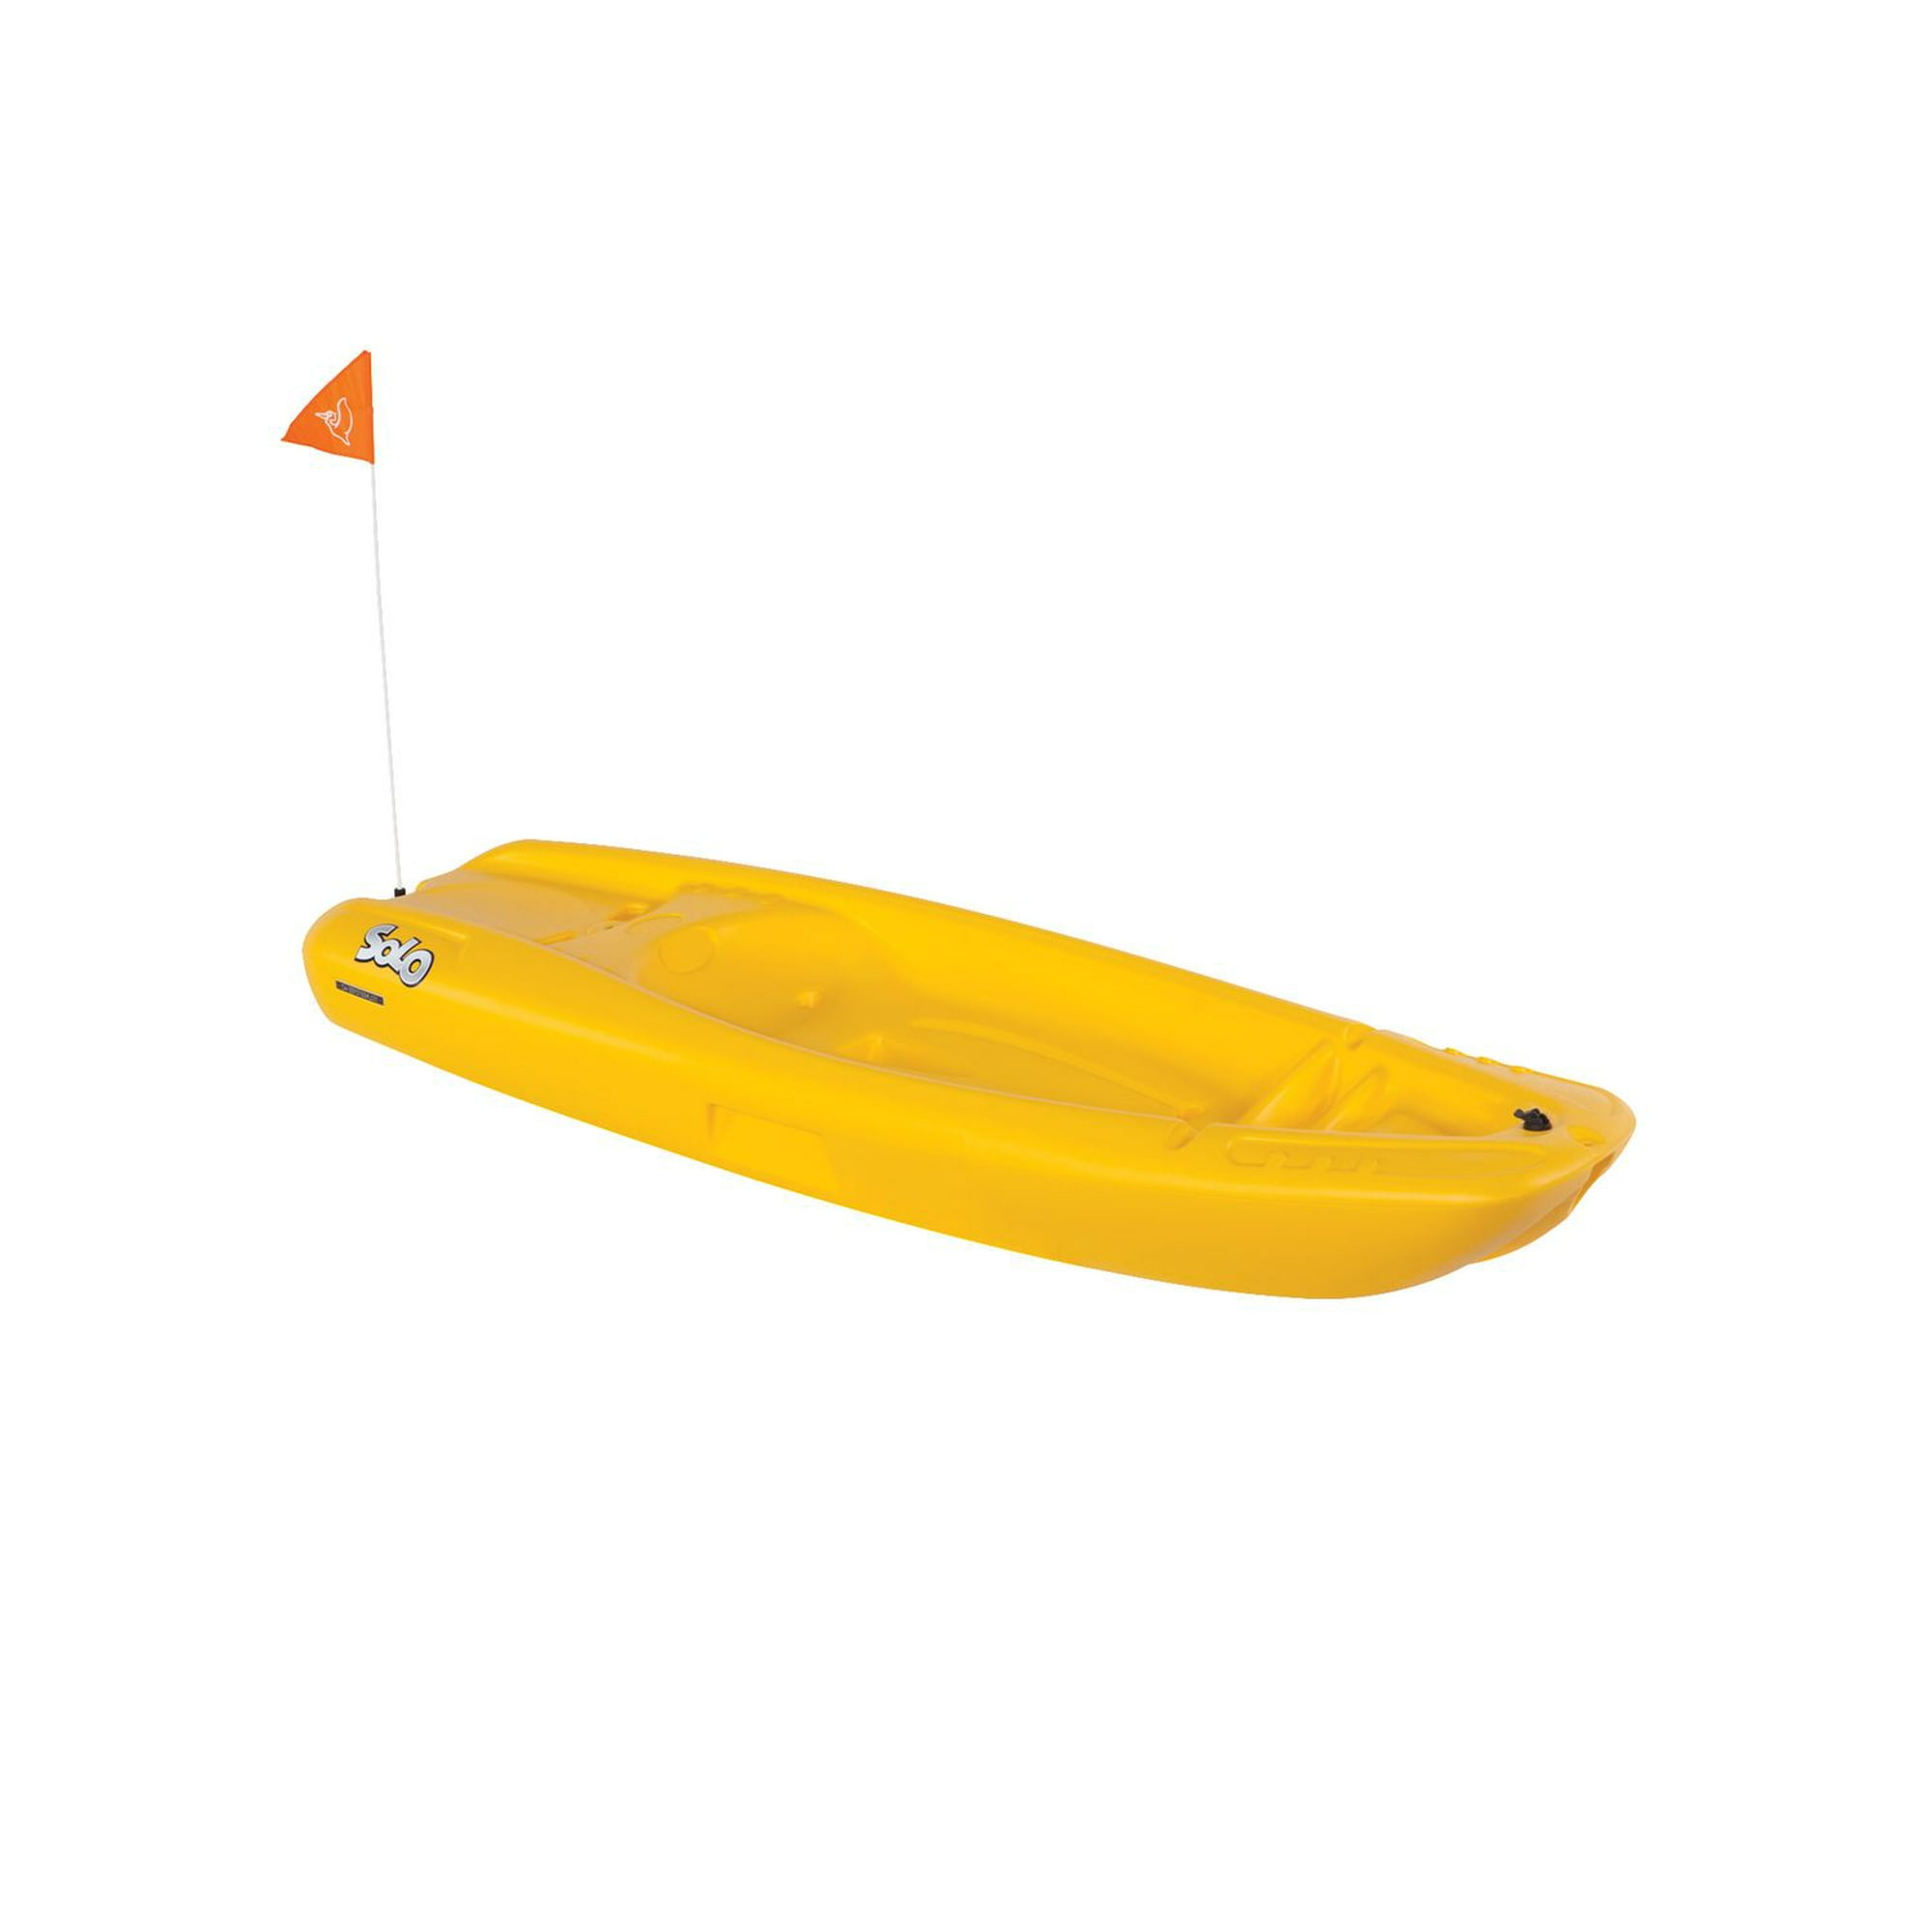 Recreational Sit-on-Top Kayak - Pelican SOLO Yellow - Paddle Included - 6  feet - Safe, Stable and Lightweight one-Person Kayak - KOS06P102 